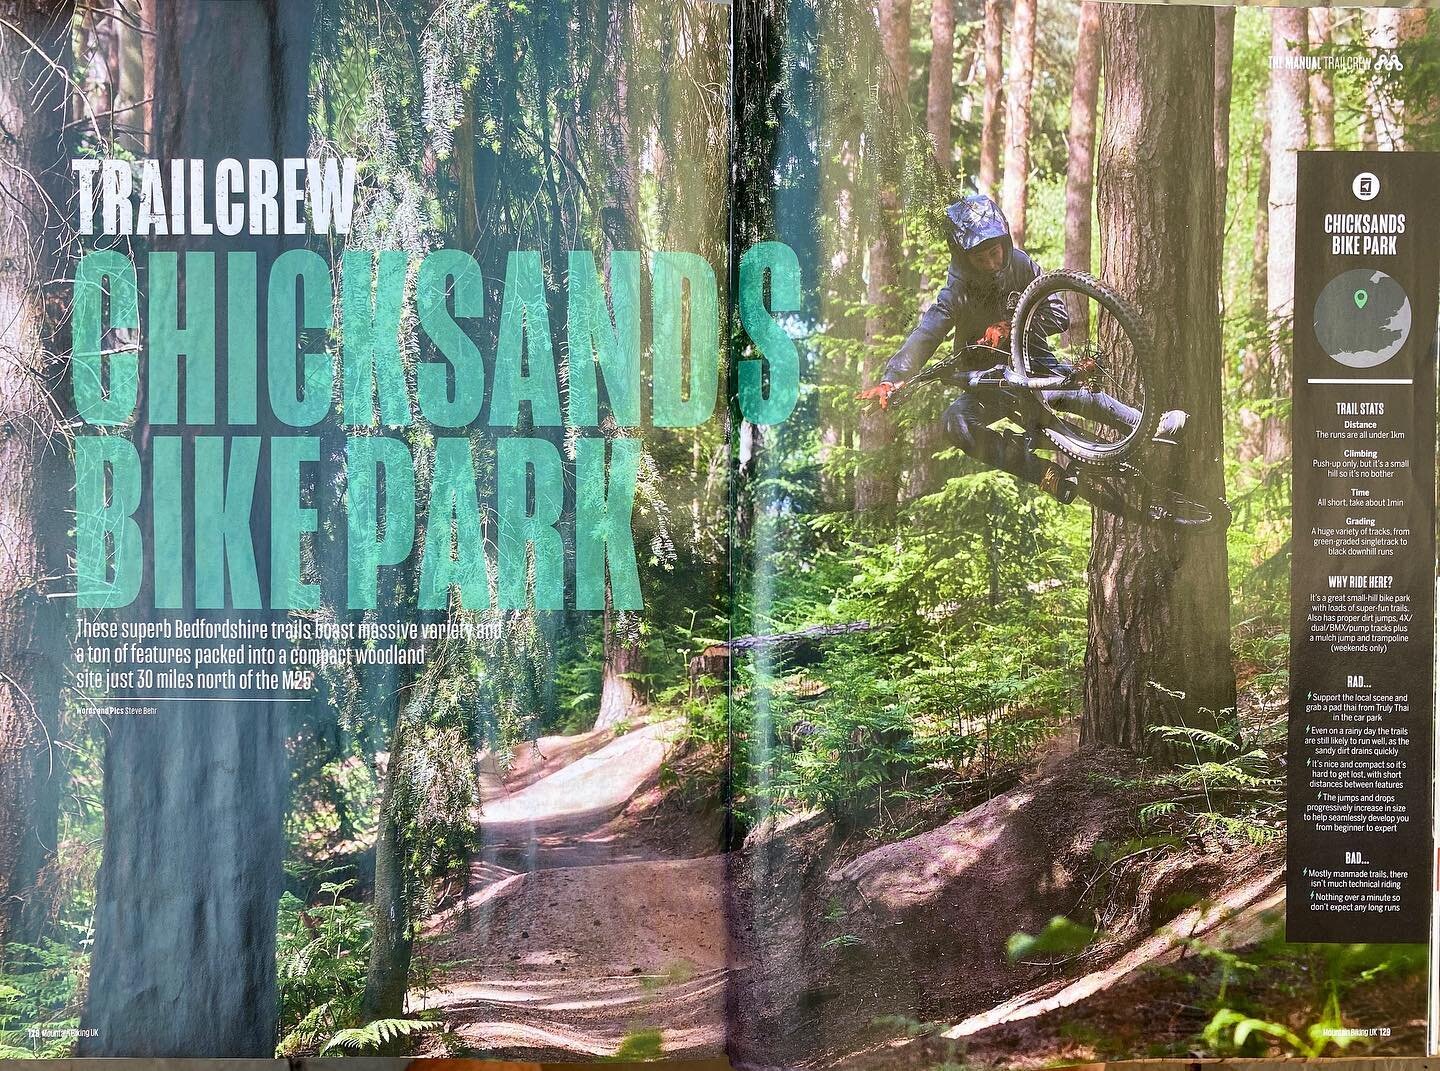 Go checkout the article on the bikepark in this months @mbukmagazine 

Cheers for coming down guys